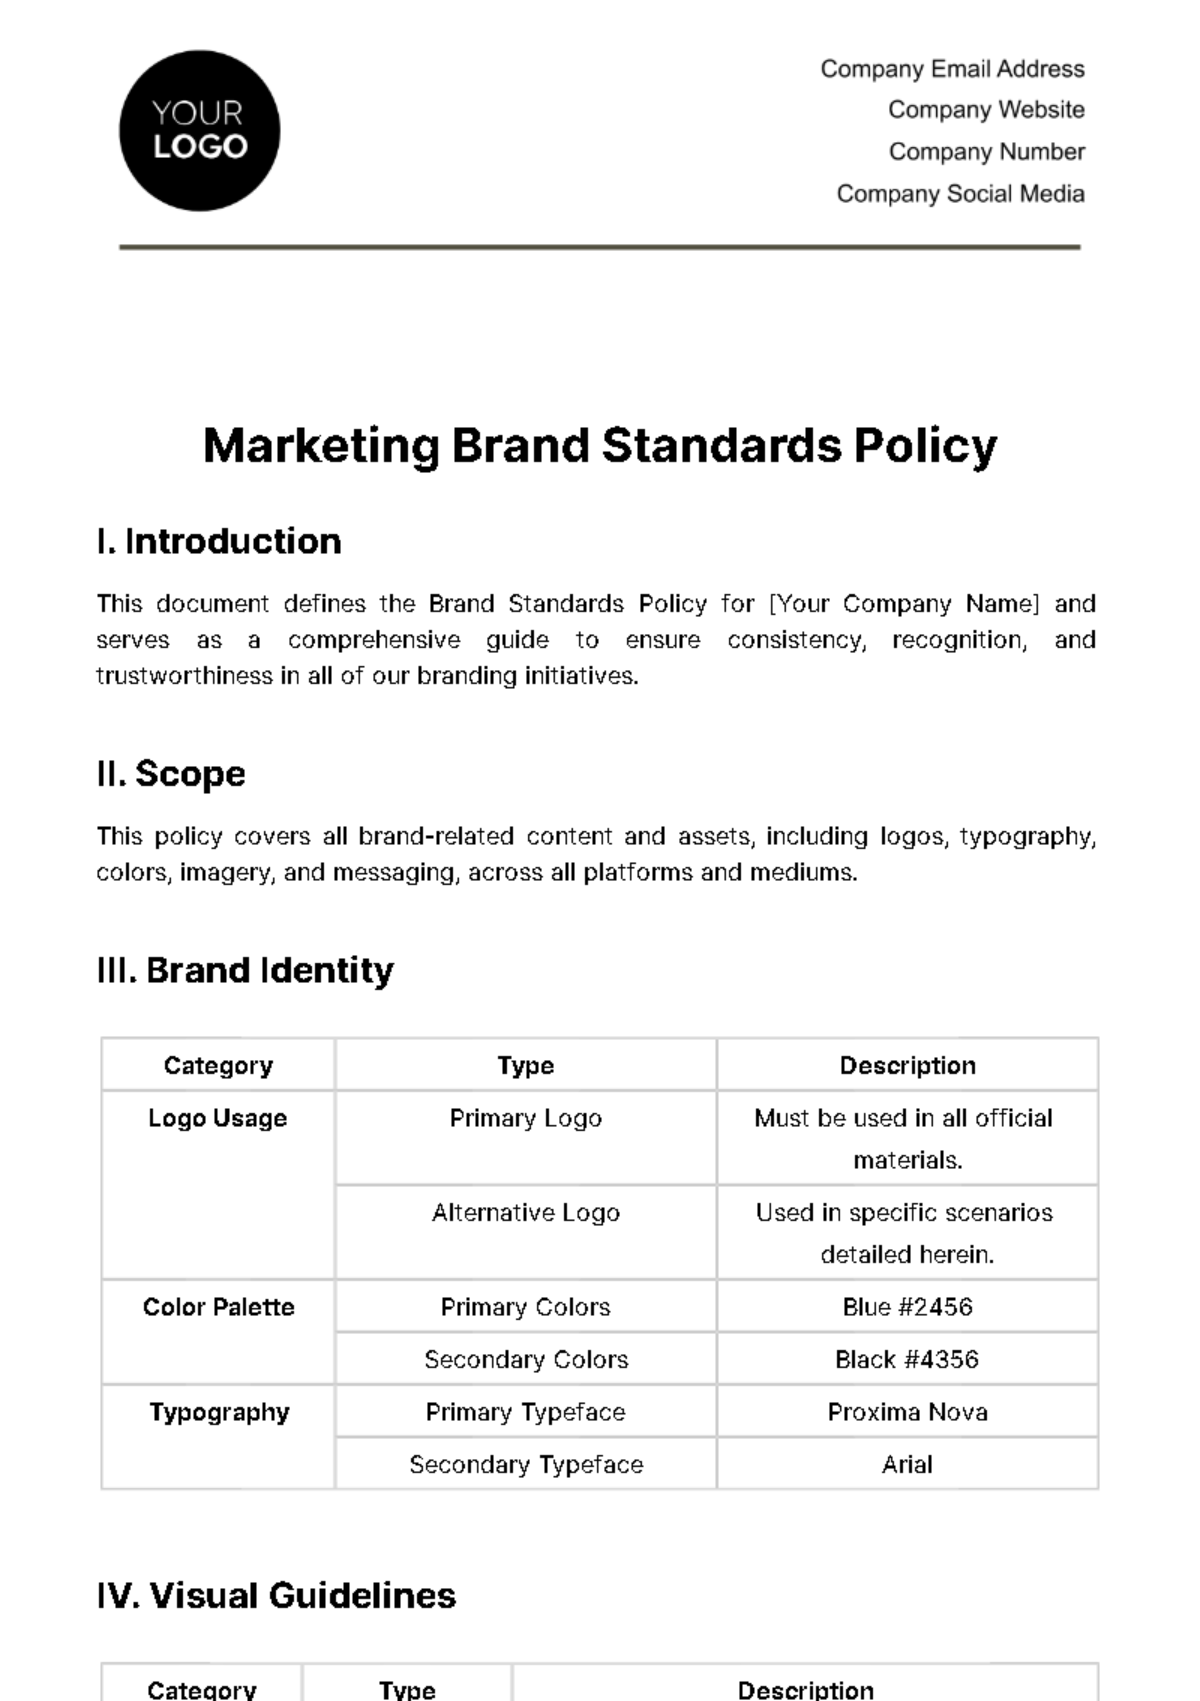 Marketing Brand Standards Policy Template